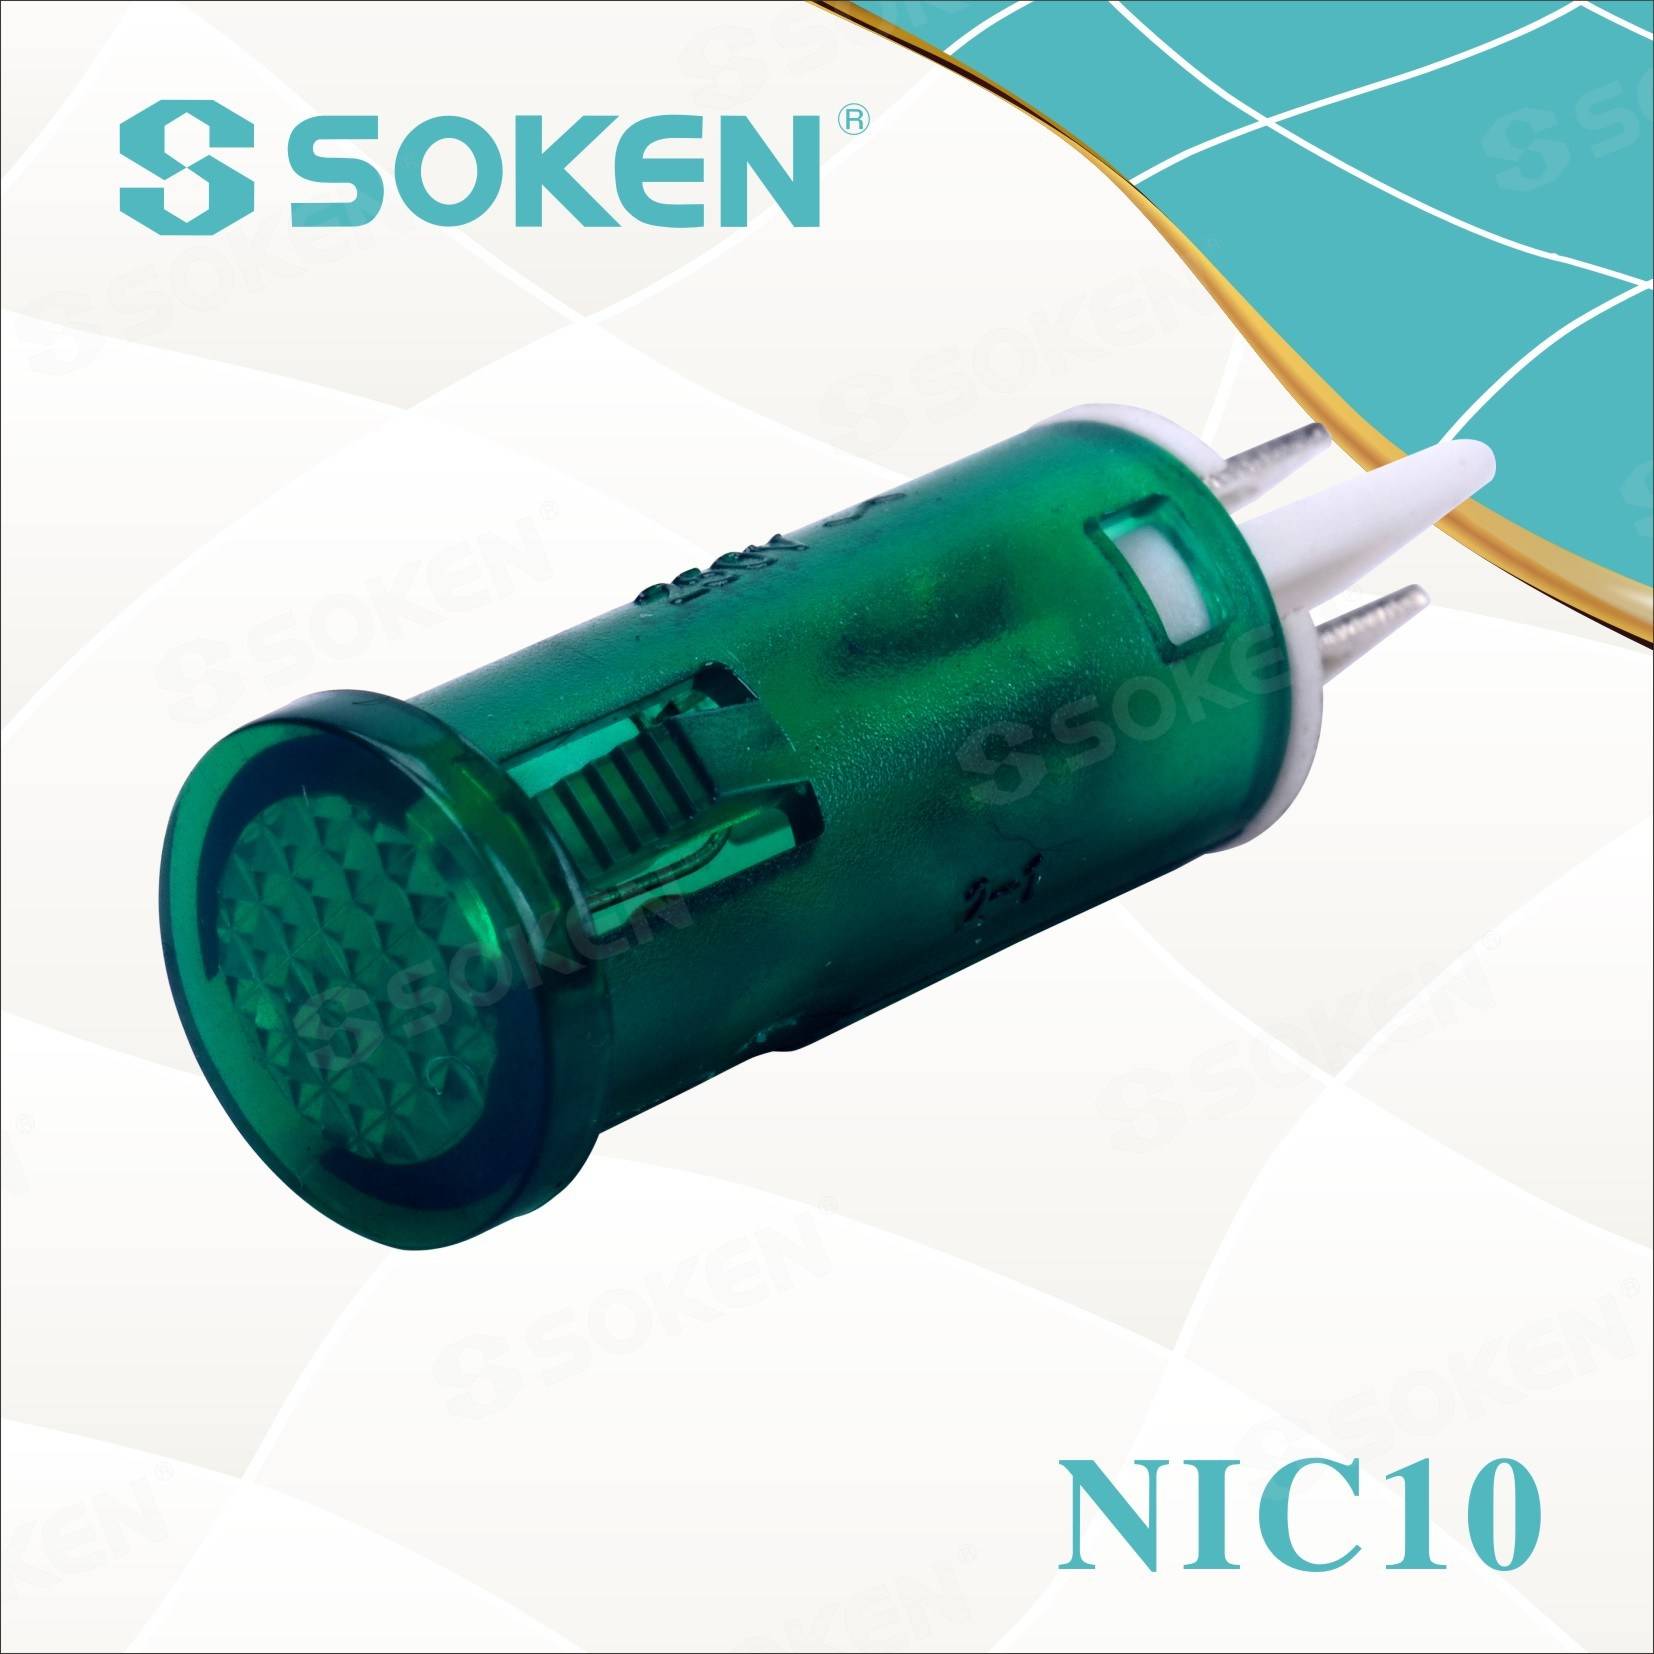 High Quality for Changover Switch -
 Soken Nic10 Indicator Light with Neon Lamp – Master Soken Electrical